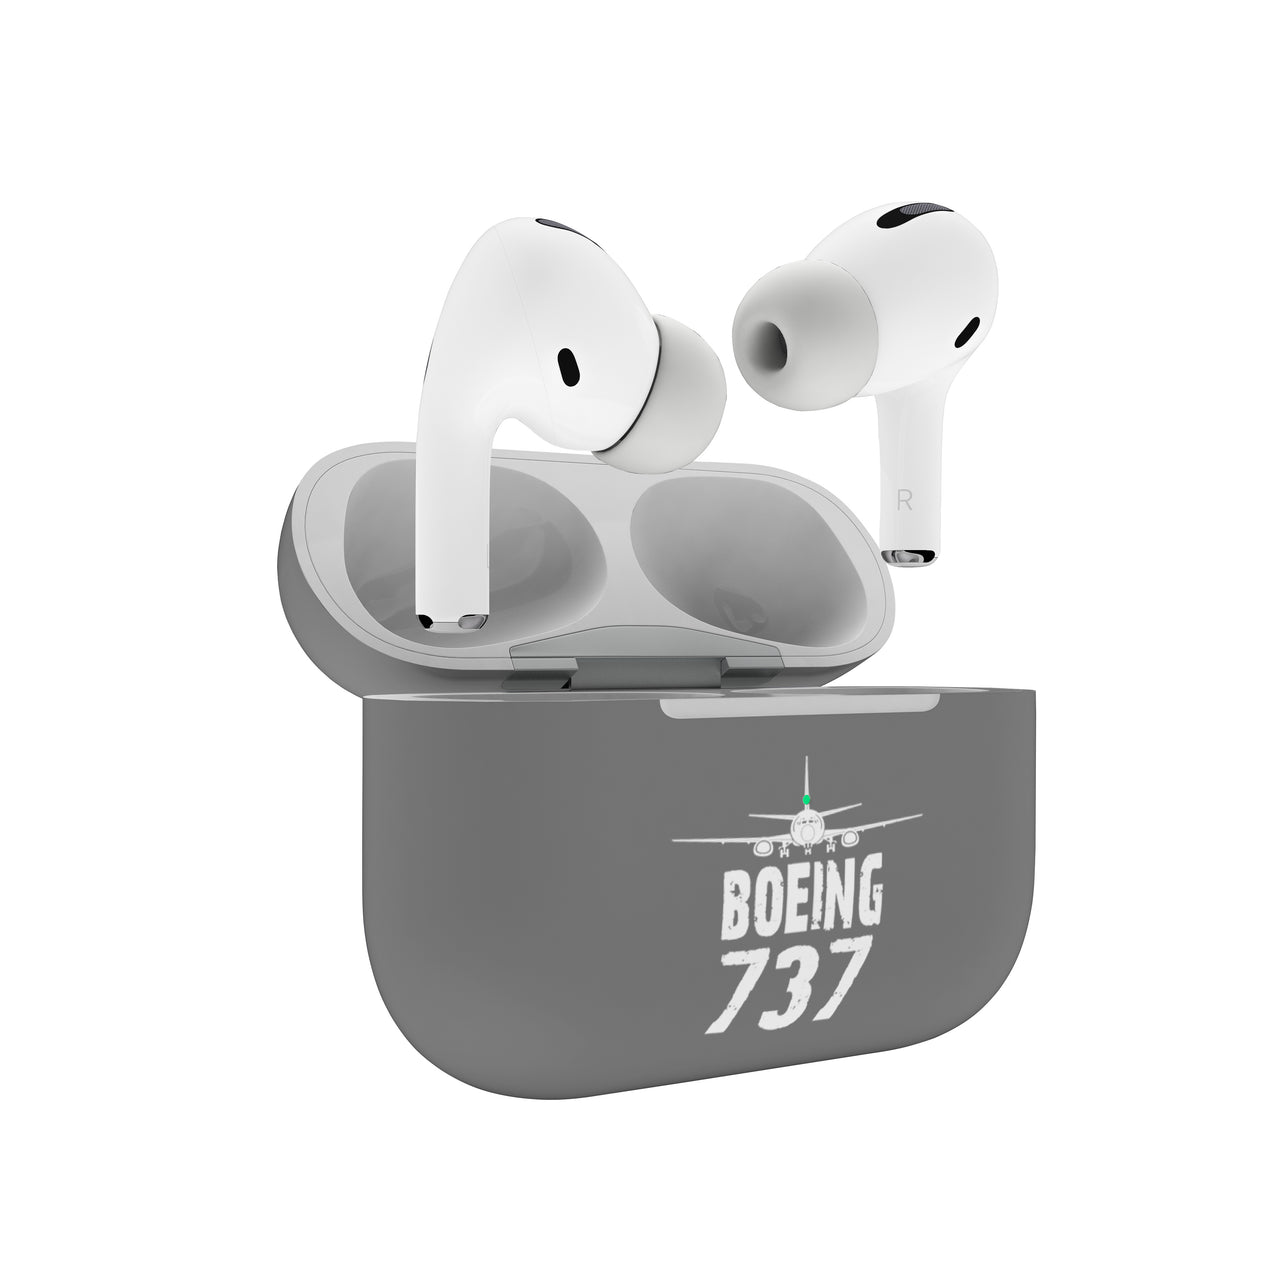 Boeing 737 & Plane Designed AirPods "Pro" Cases